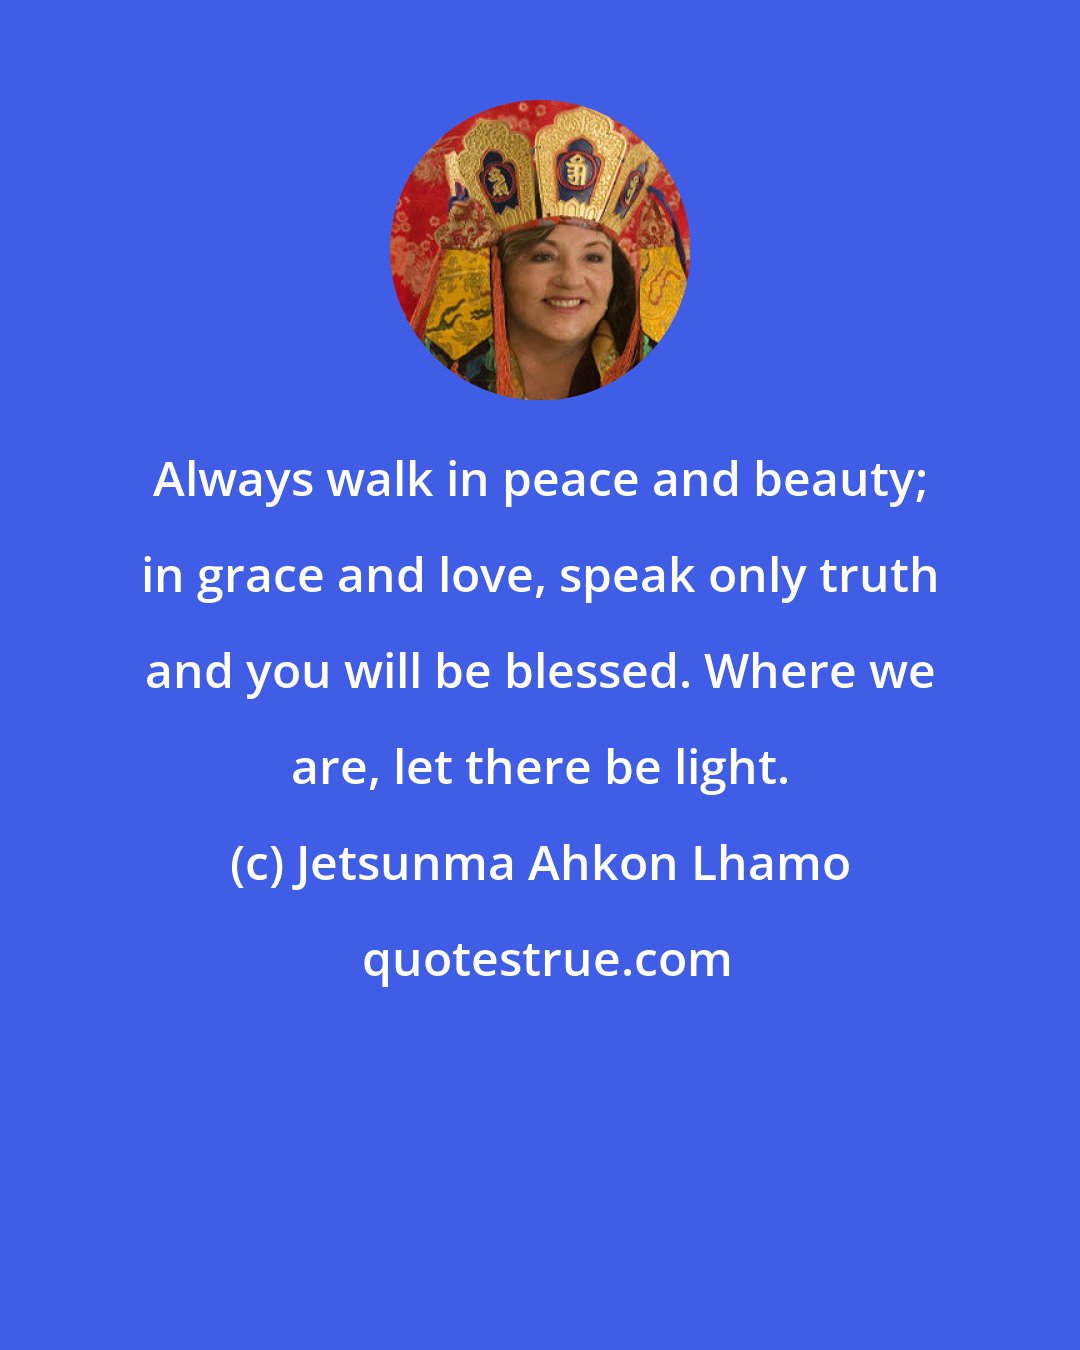 Jetsunma Ahkon Lhamo: Always walk in peace and beauty; in grace and love, speak only truth and you will be blessed. Where we are, let there be light.